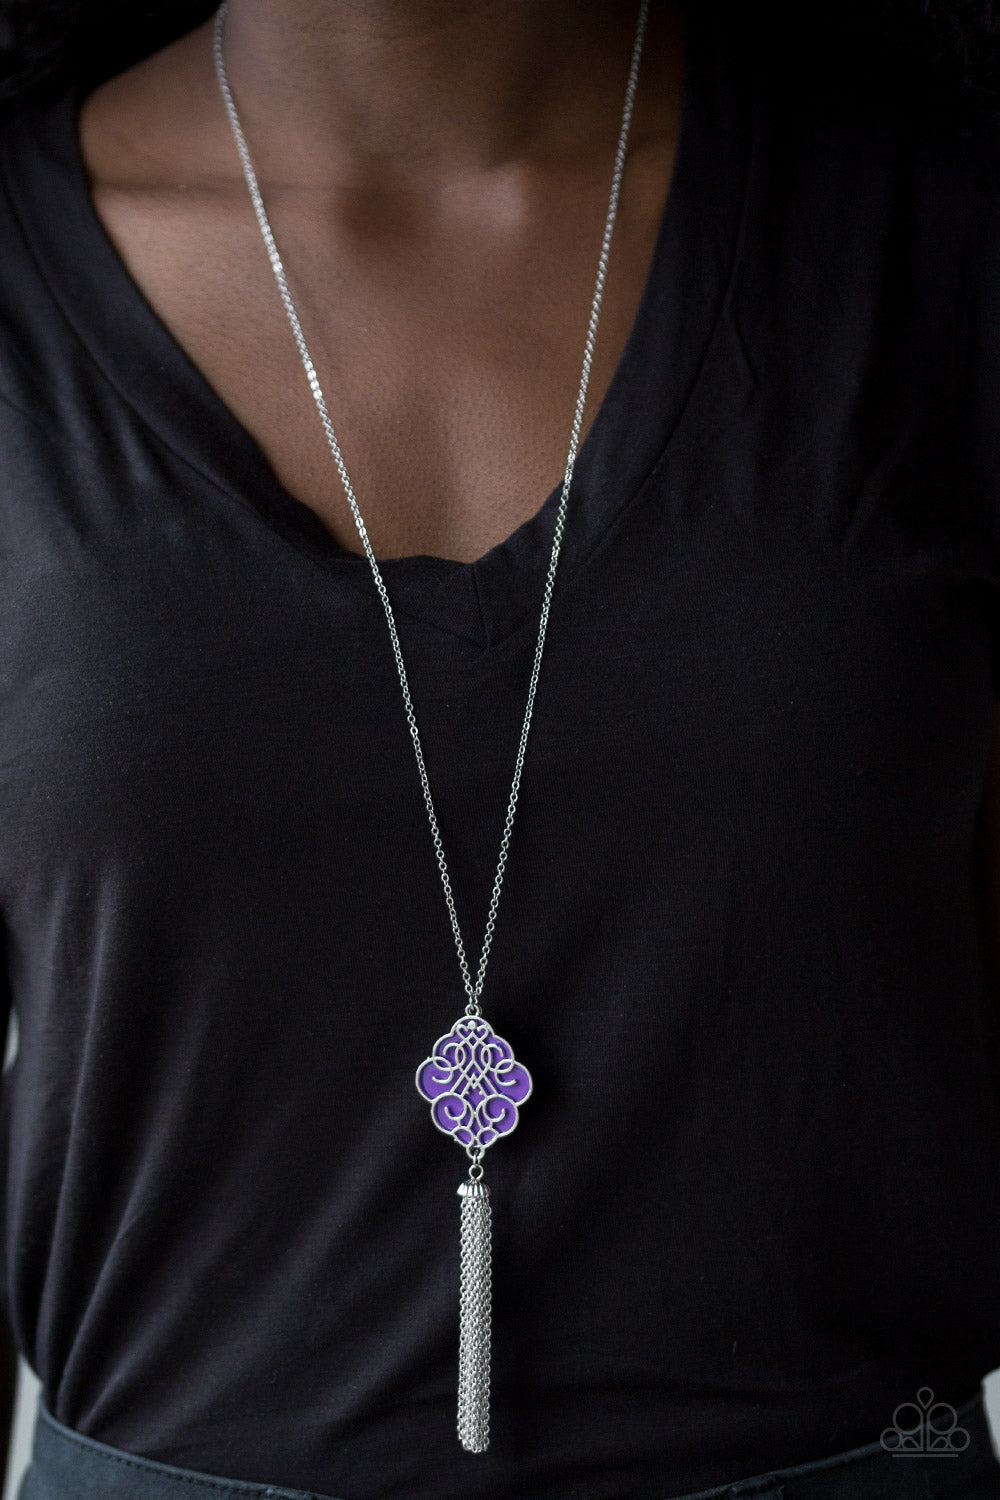 Malibu Mandala - Purple and Silver Necklace & Earrings - Paparazzi Accessories - 
Shimmery silver filigree swirls across a shiny purple backdrop, coalescing into a colorful pendant. A glistening silver chain tassel swings from the bottom of the pendant for a whimsical finish. Features an adjustable clasp closure.